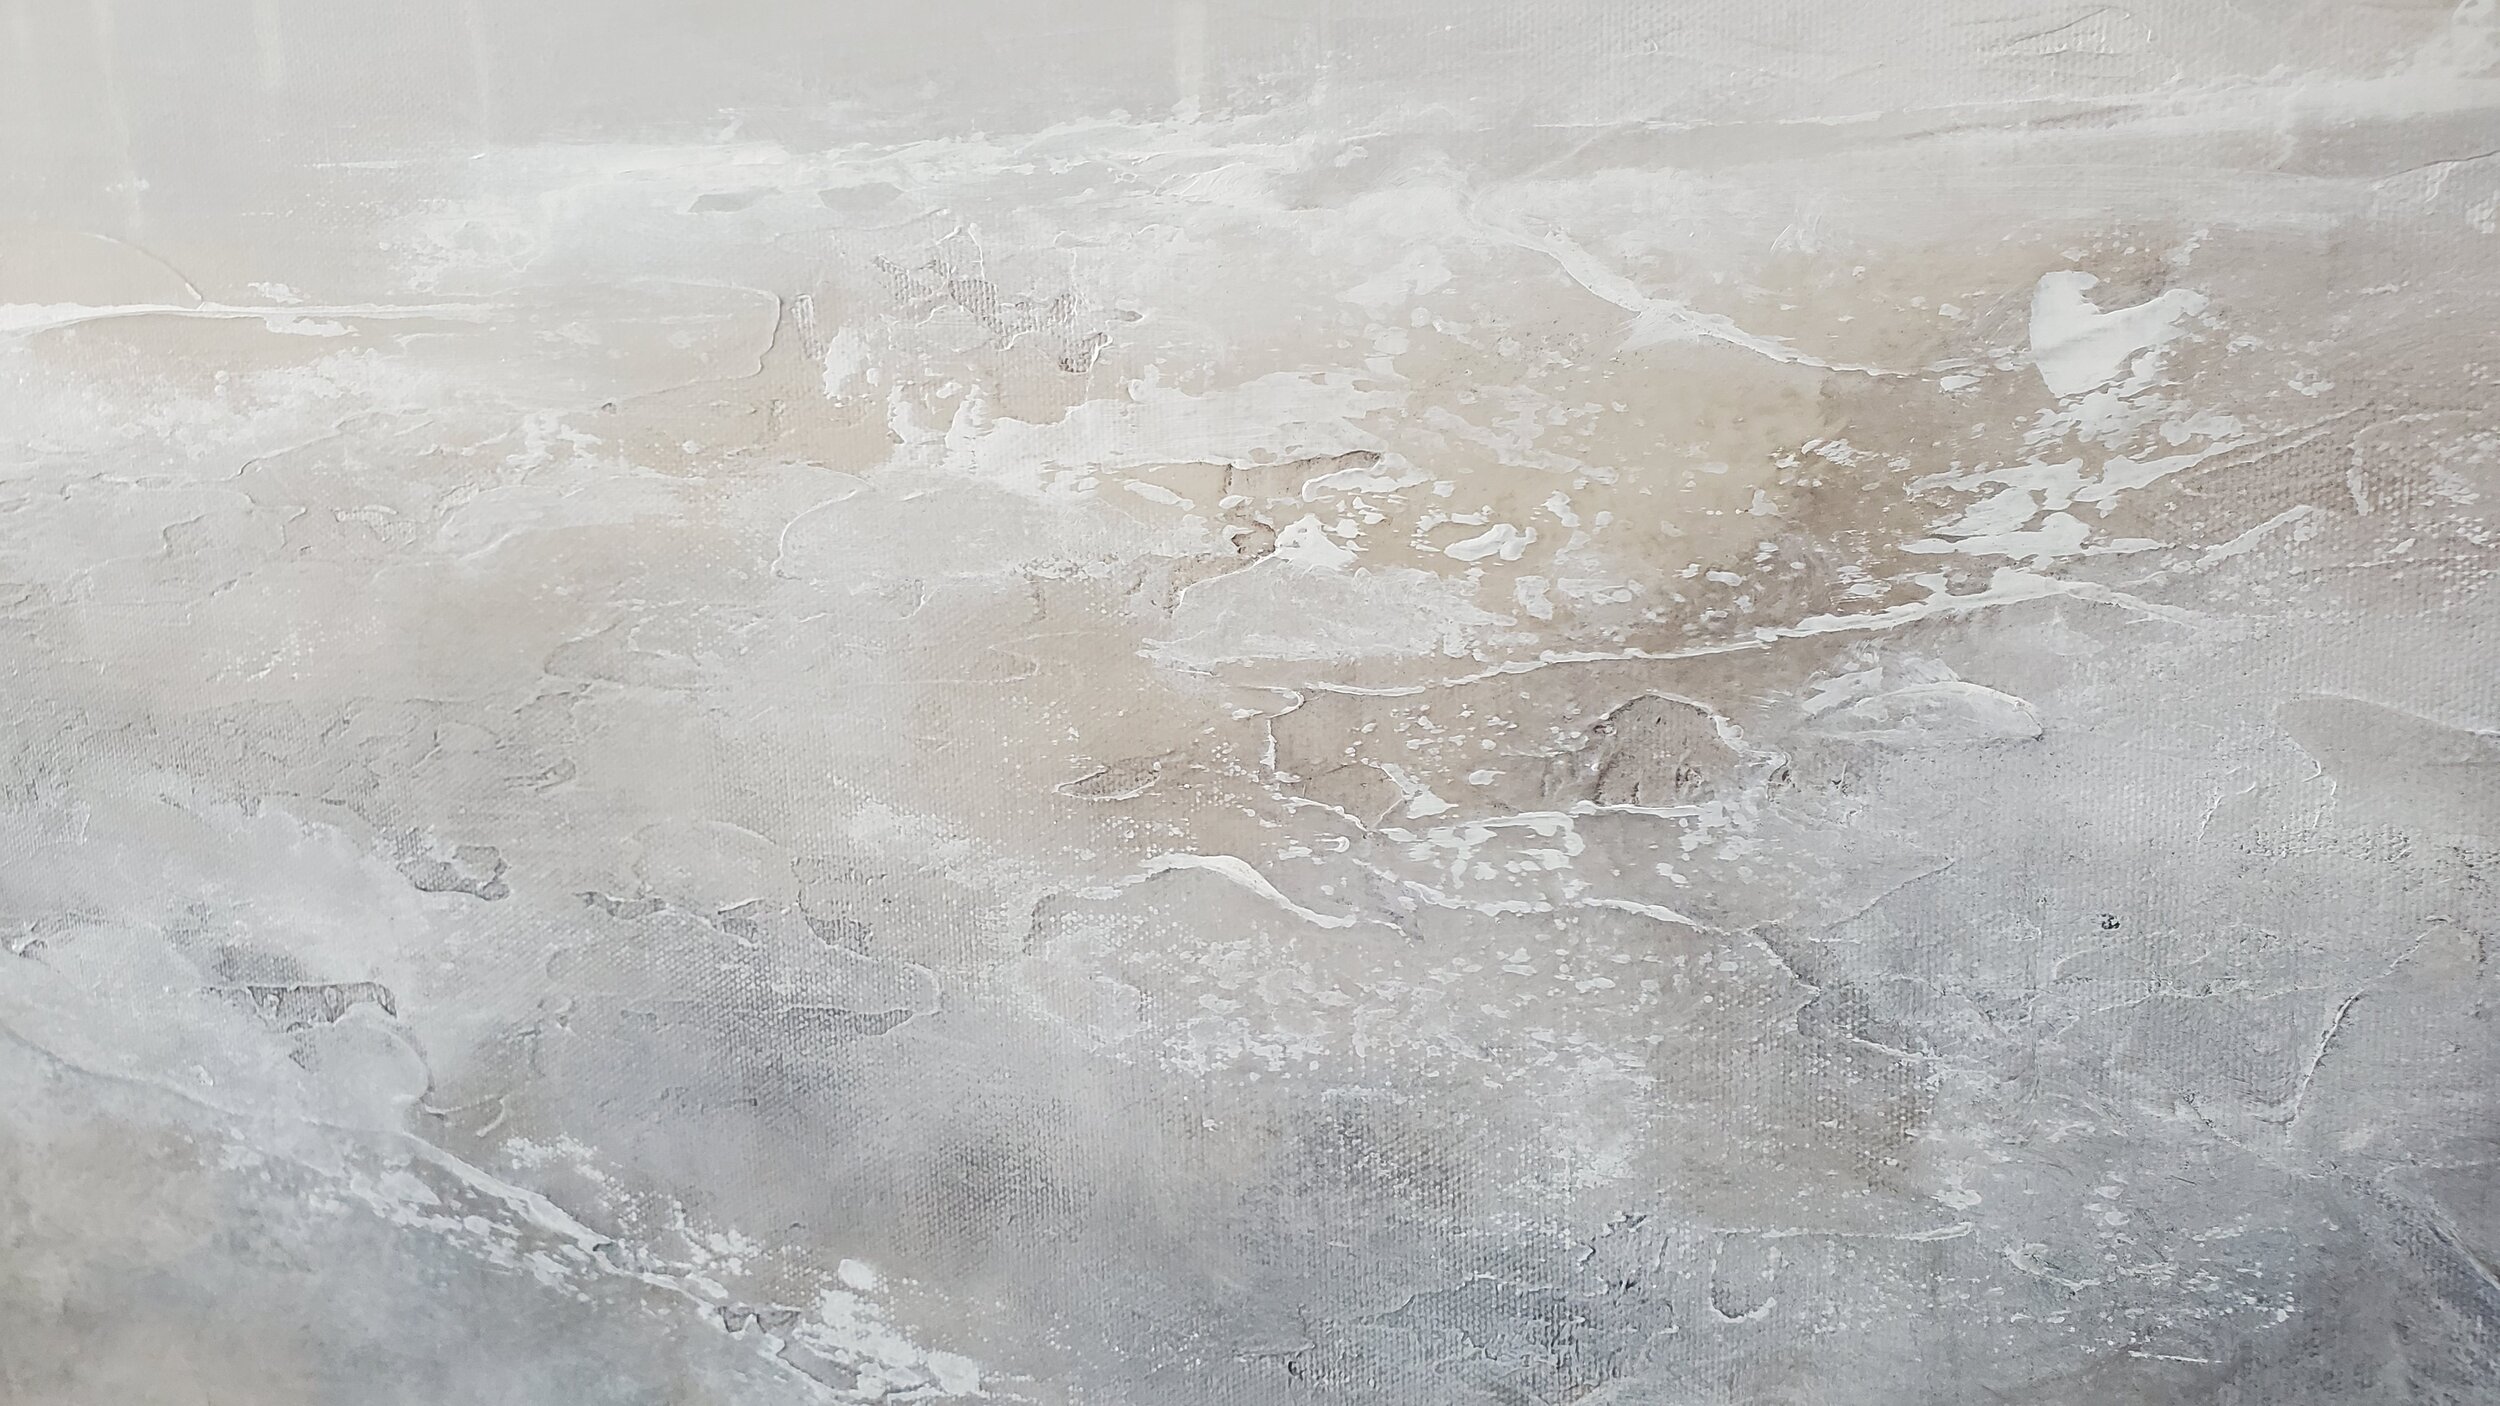  Painting #6 Courage- Vancouver abstract painter, Donna Giraud has eleven new available artworks for sale in her 2020 solo art exhibition titled, Lost and Found. Her large scale, abstract, textural artworks are perfect for any interior design aesthet